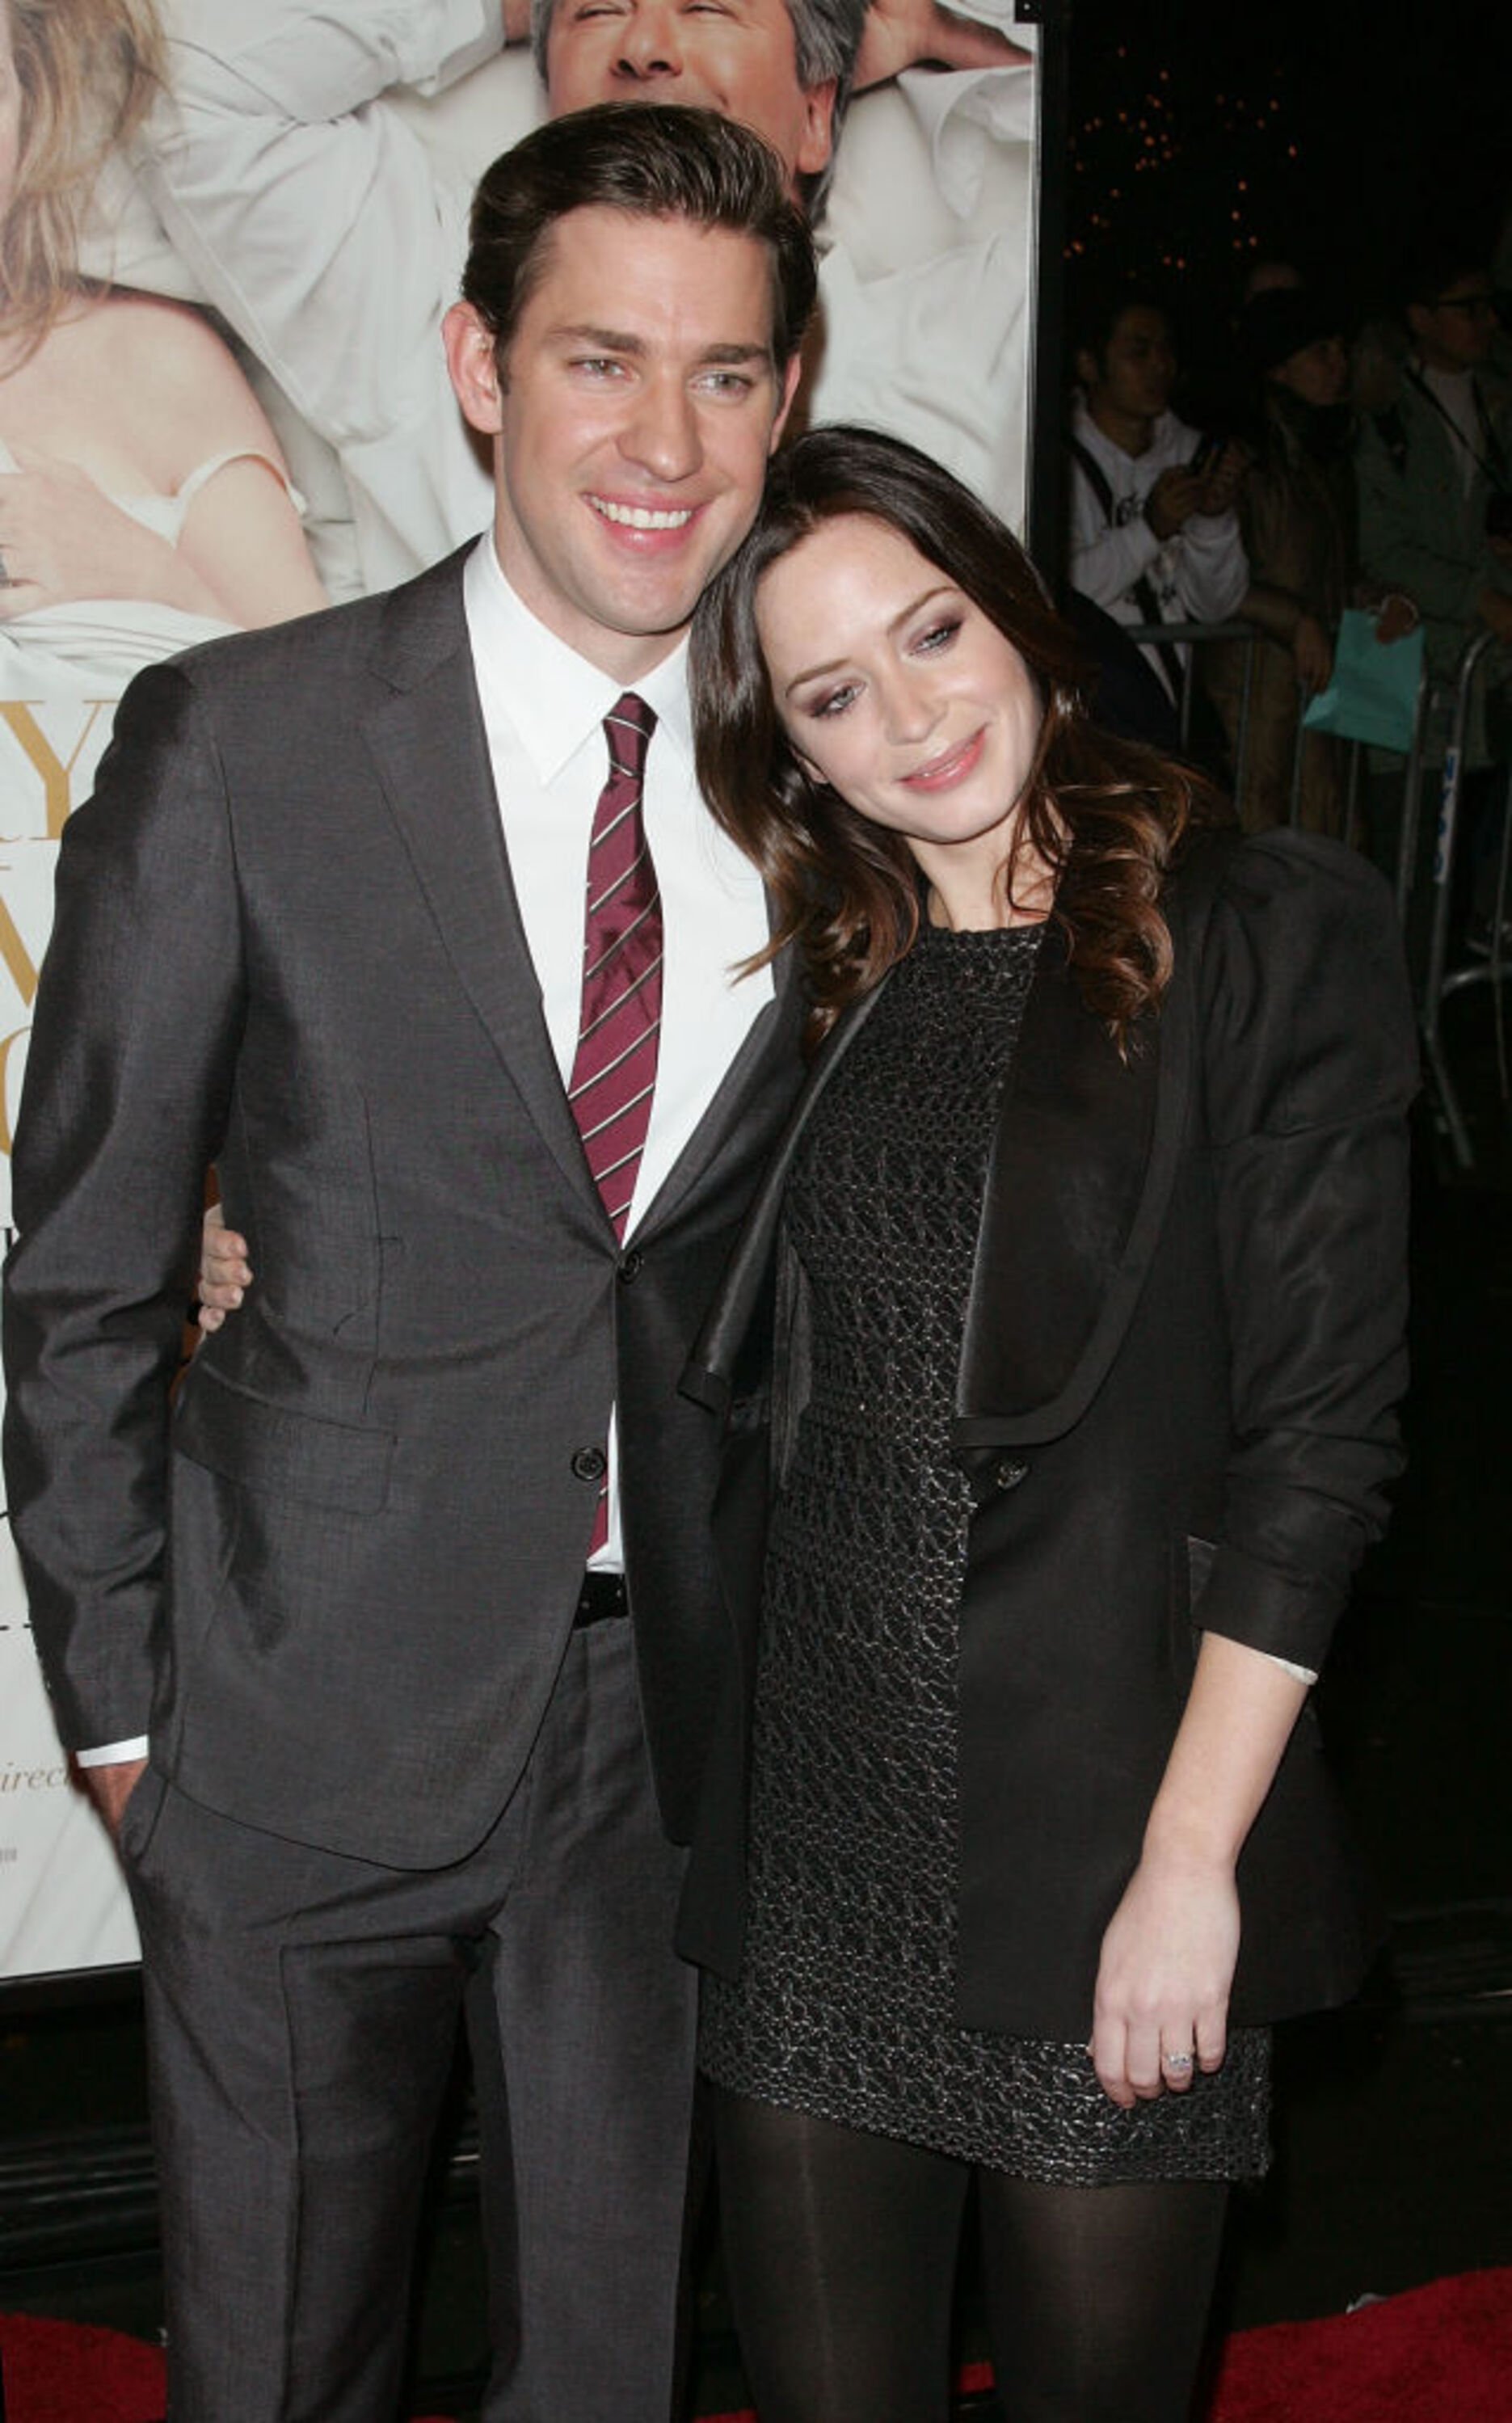 John Krasinski and Emily Blunt at the premiere of "It's Complicated" on December 9, 2009, in New York | Source: Getty Images